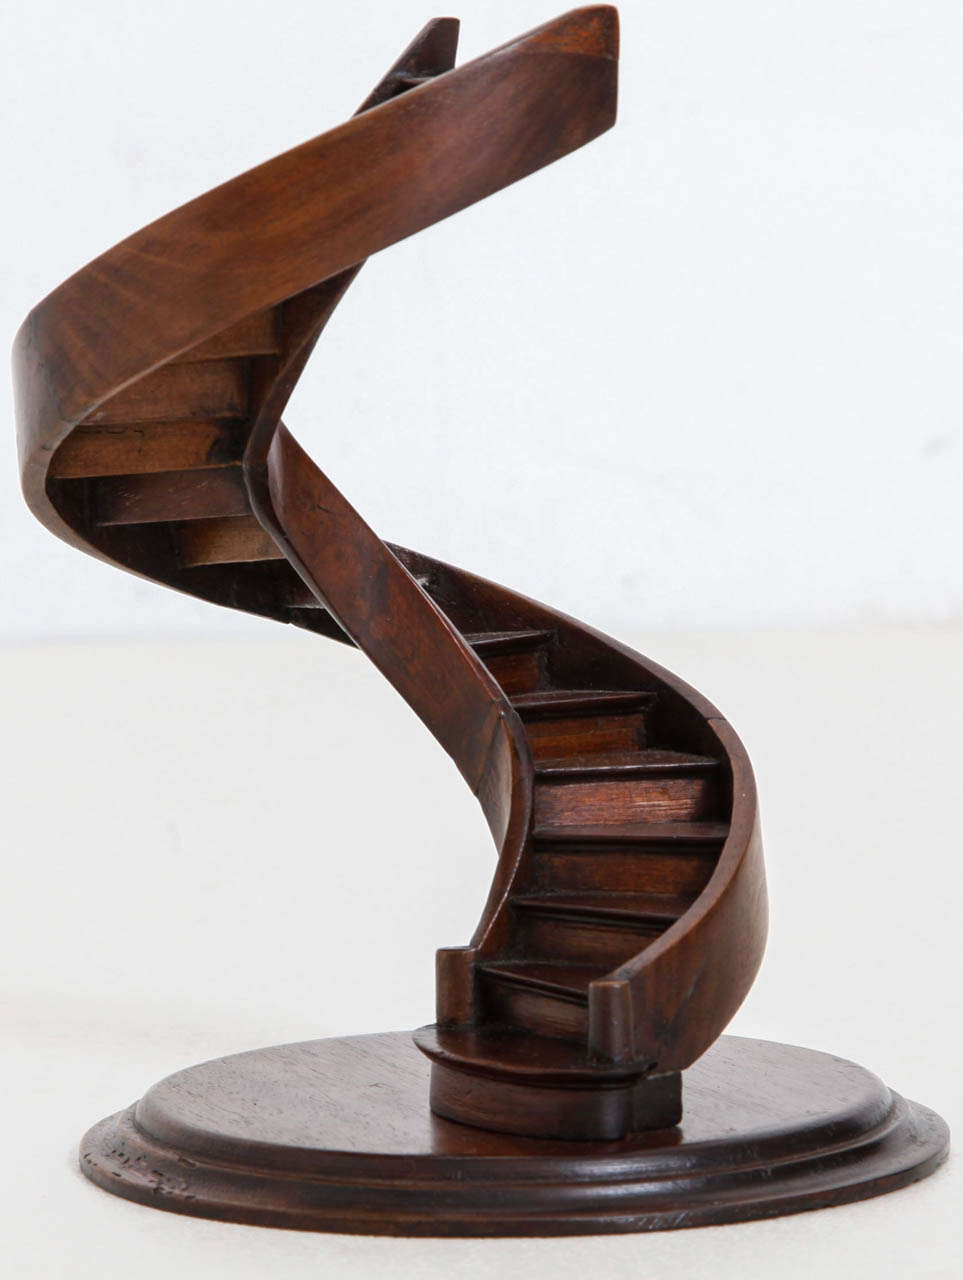 A late 19th French wooden model of a stair. Very nice condition, in Rosewood.
All original base and stair.These models were made by  pupils of the Compagnonnage.Societies of journeymen in certain craft trades in France. They were typically eighteen